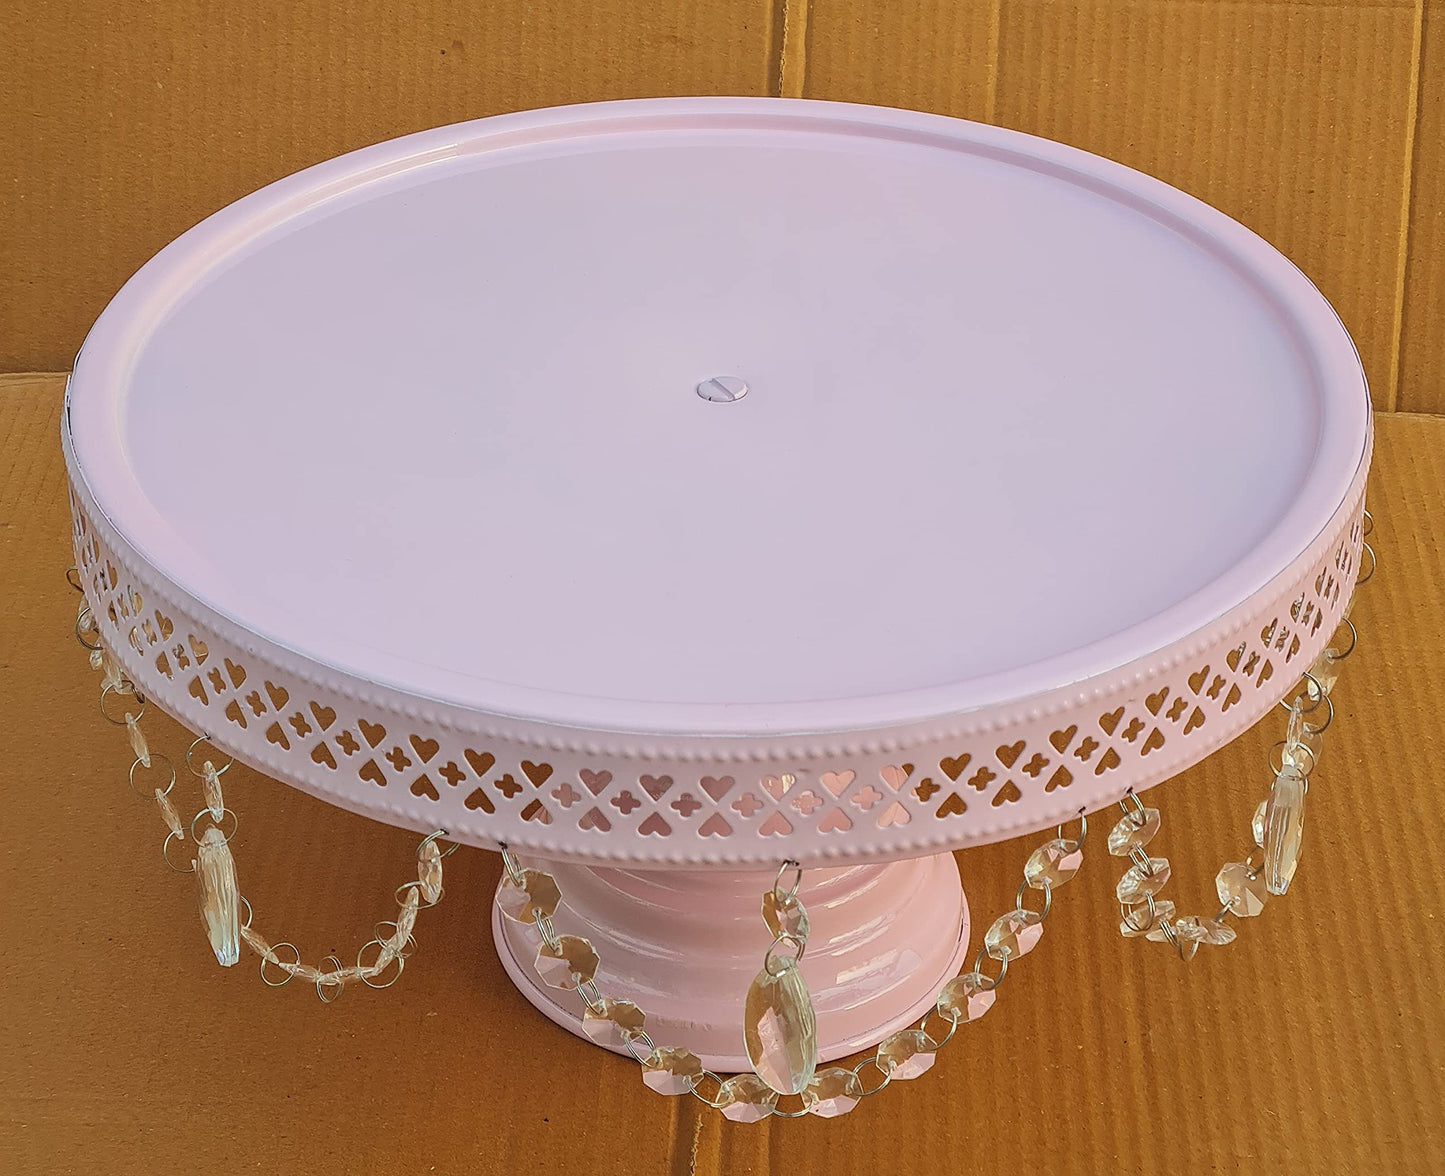 GiftBay Creations Cake Stand Pedestal 11" Diameter (Top), Strong Metal with Clear Hanging Crystals (Pink)